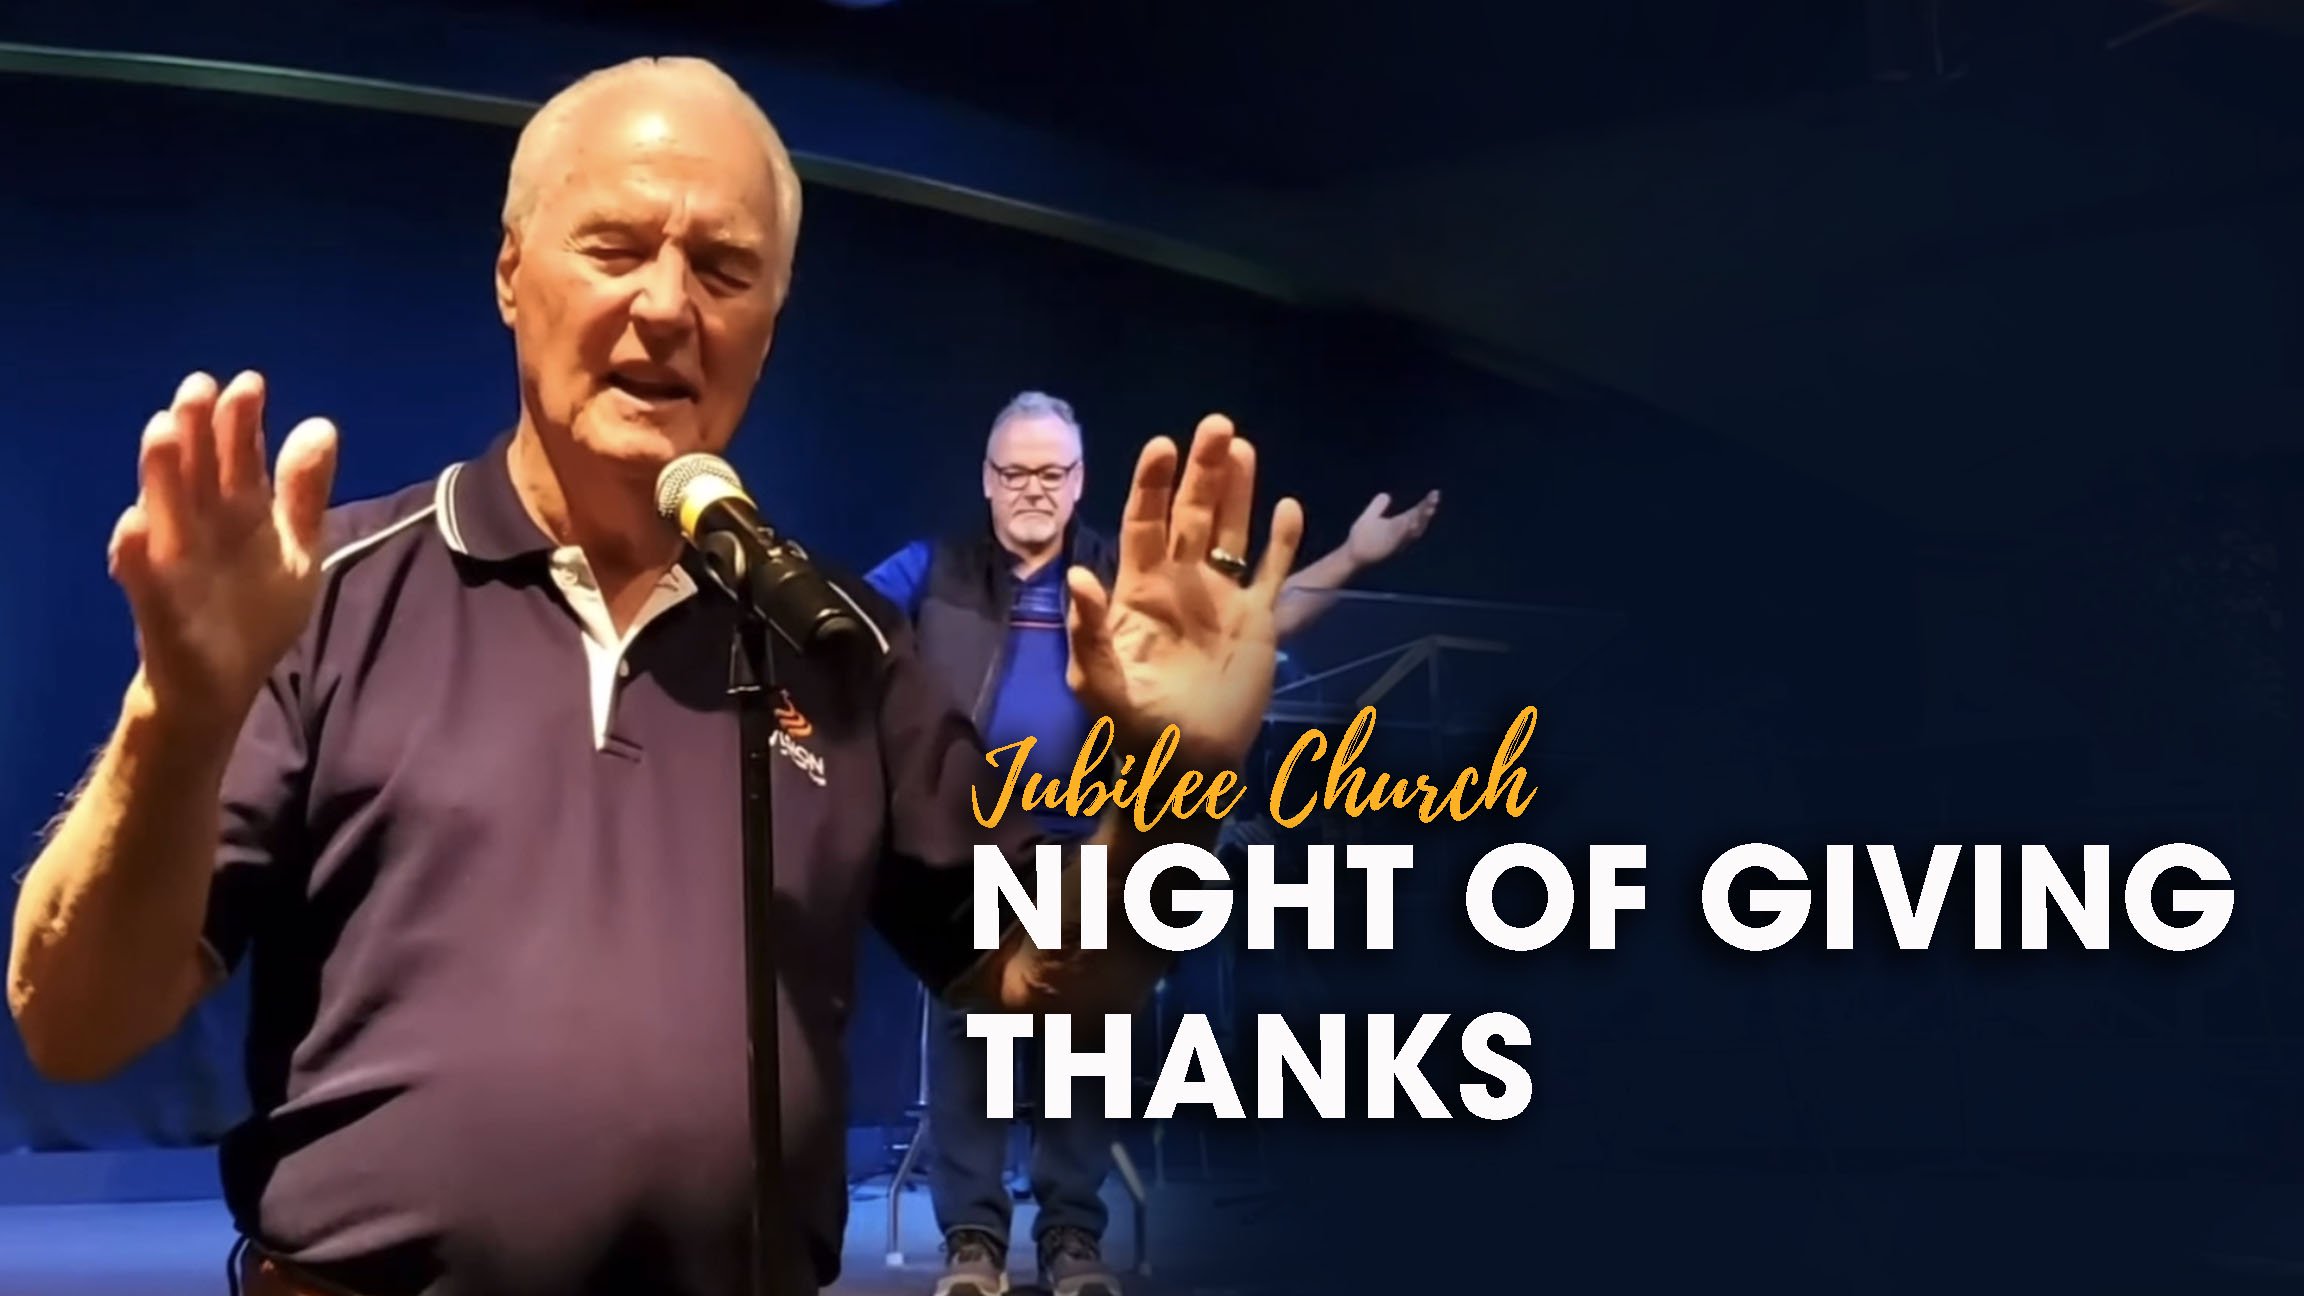 Night of Giving Thanks Service